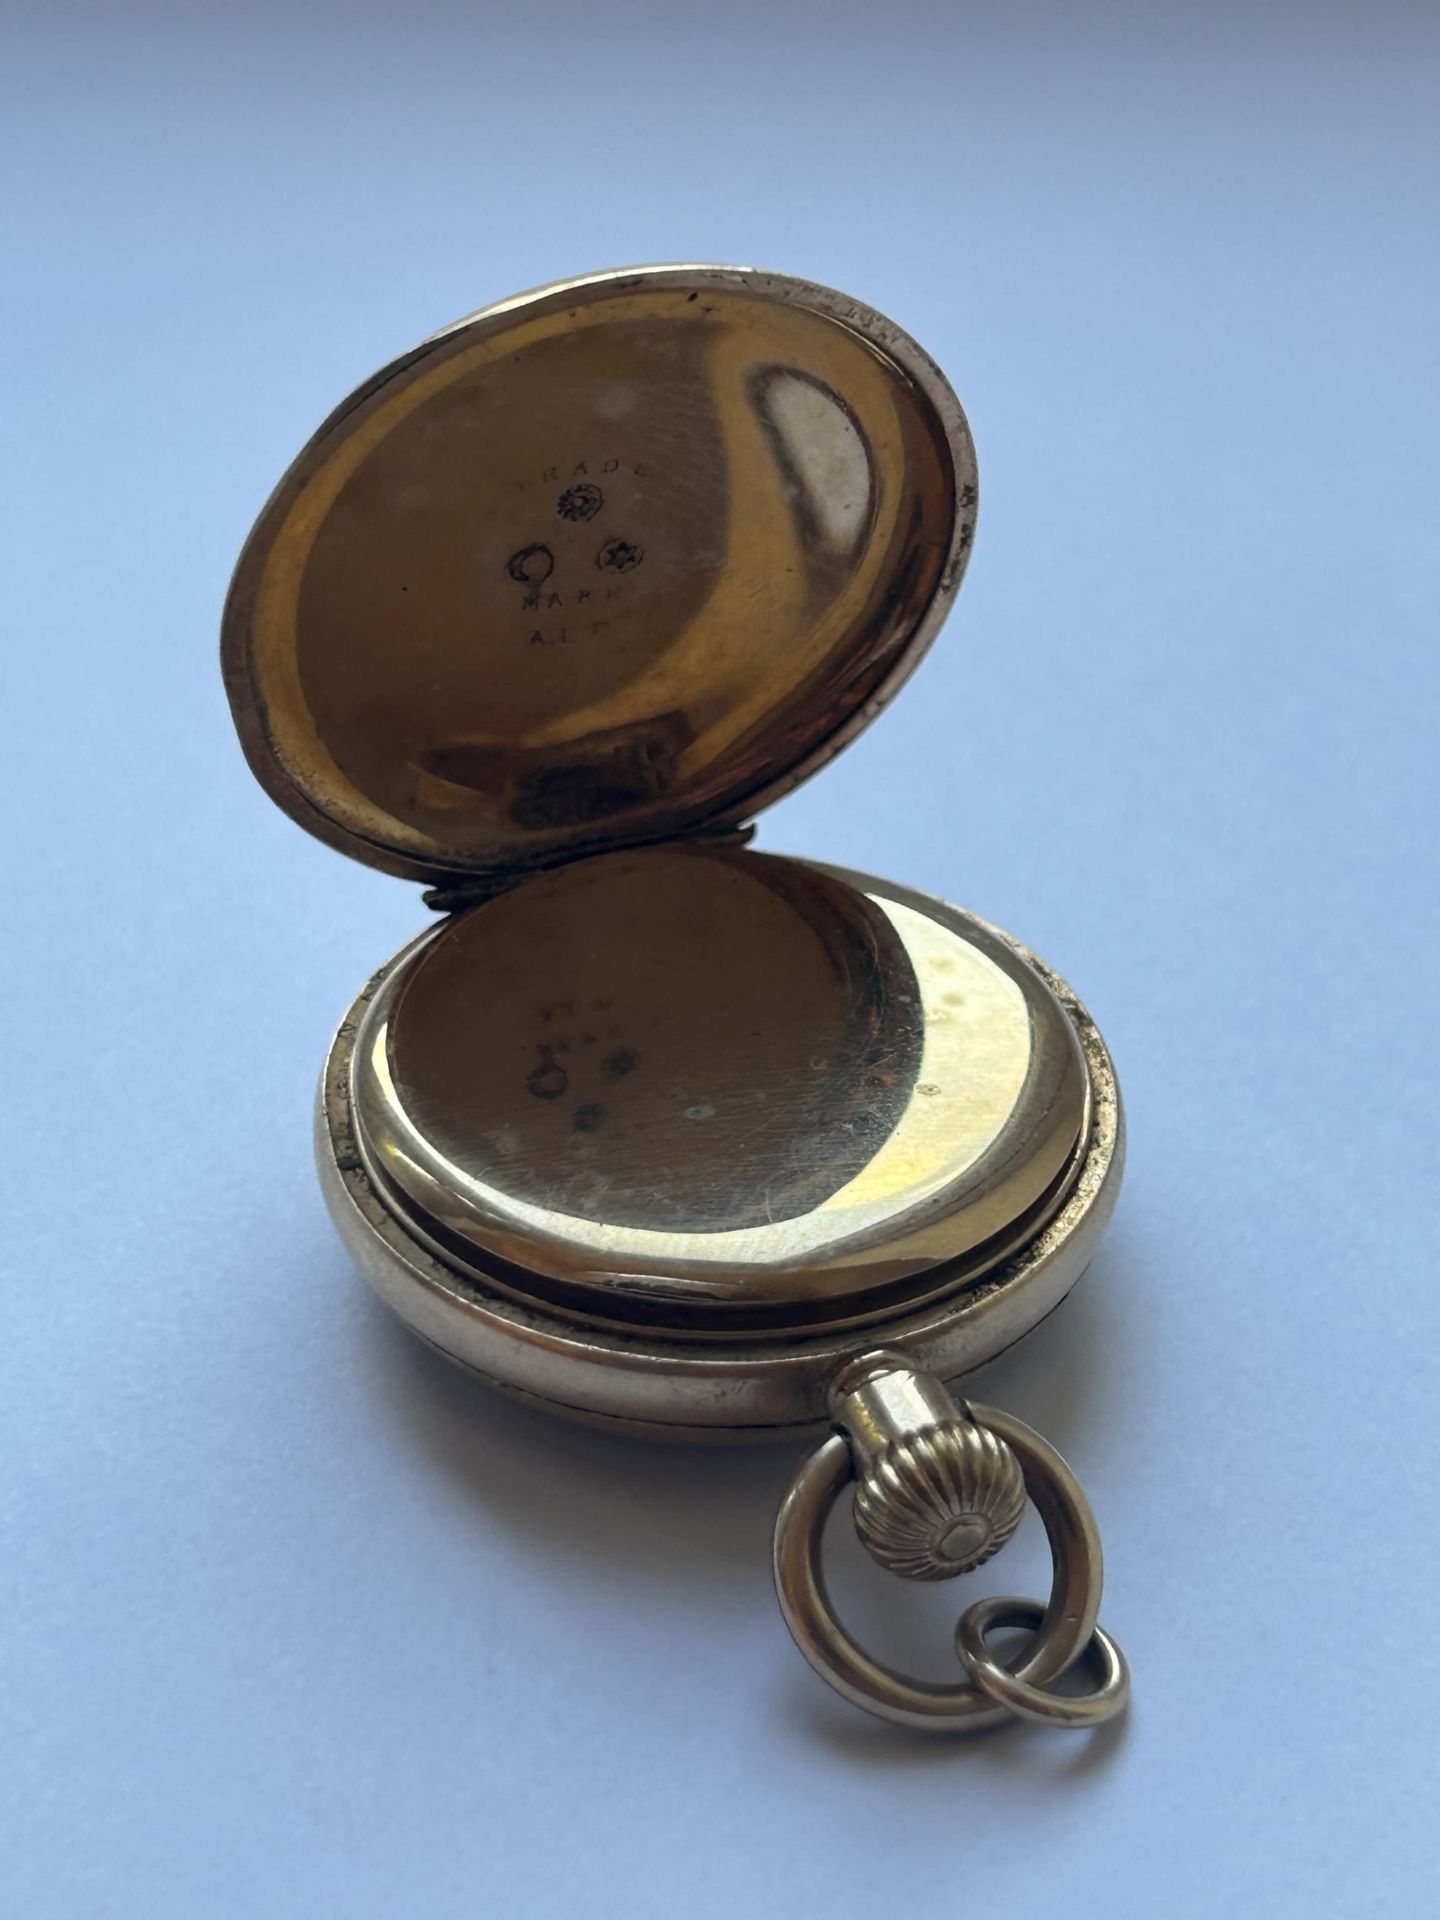 A 14CT GOLD LADIES OPEN FACED POCKET WATCH GROSS WEIGHT 40.20 GRAMS - Image 4 of 6